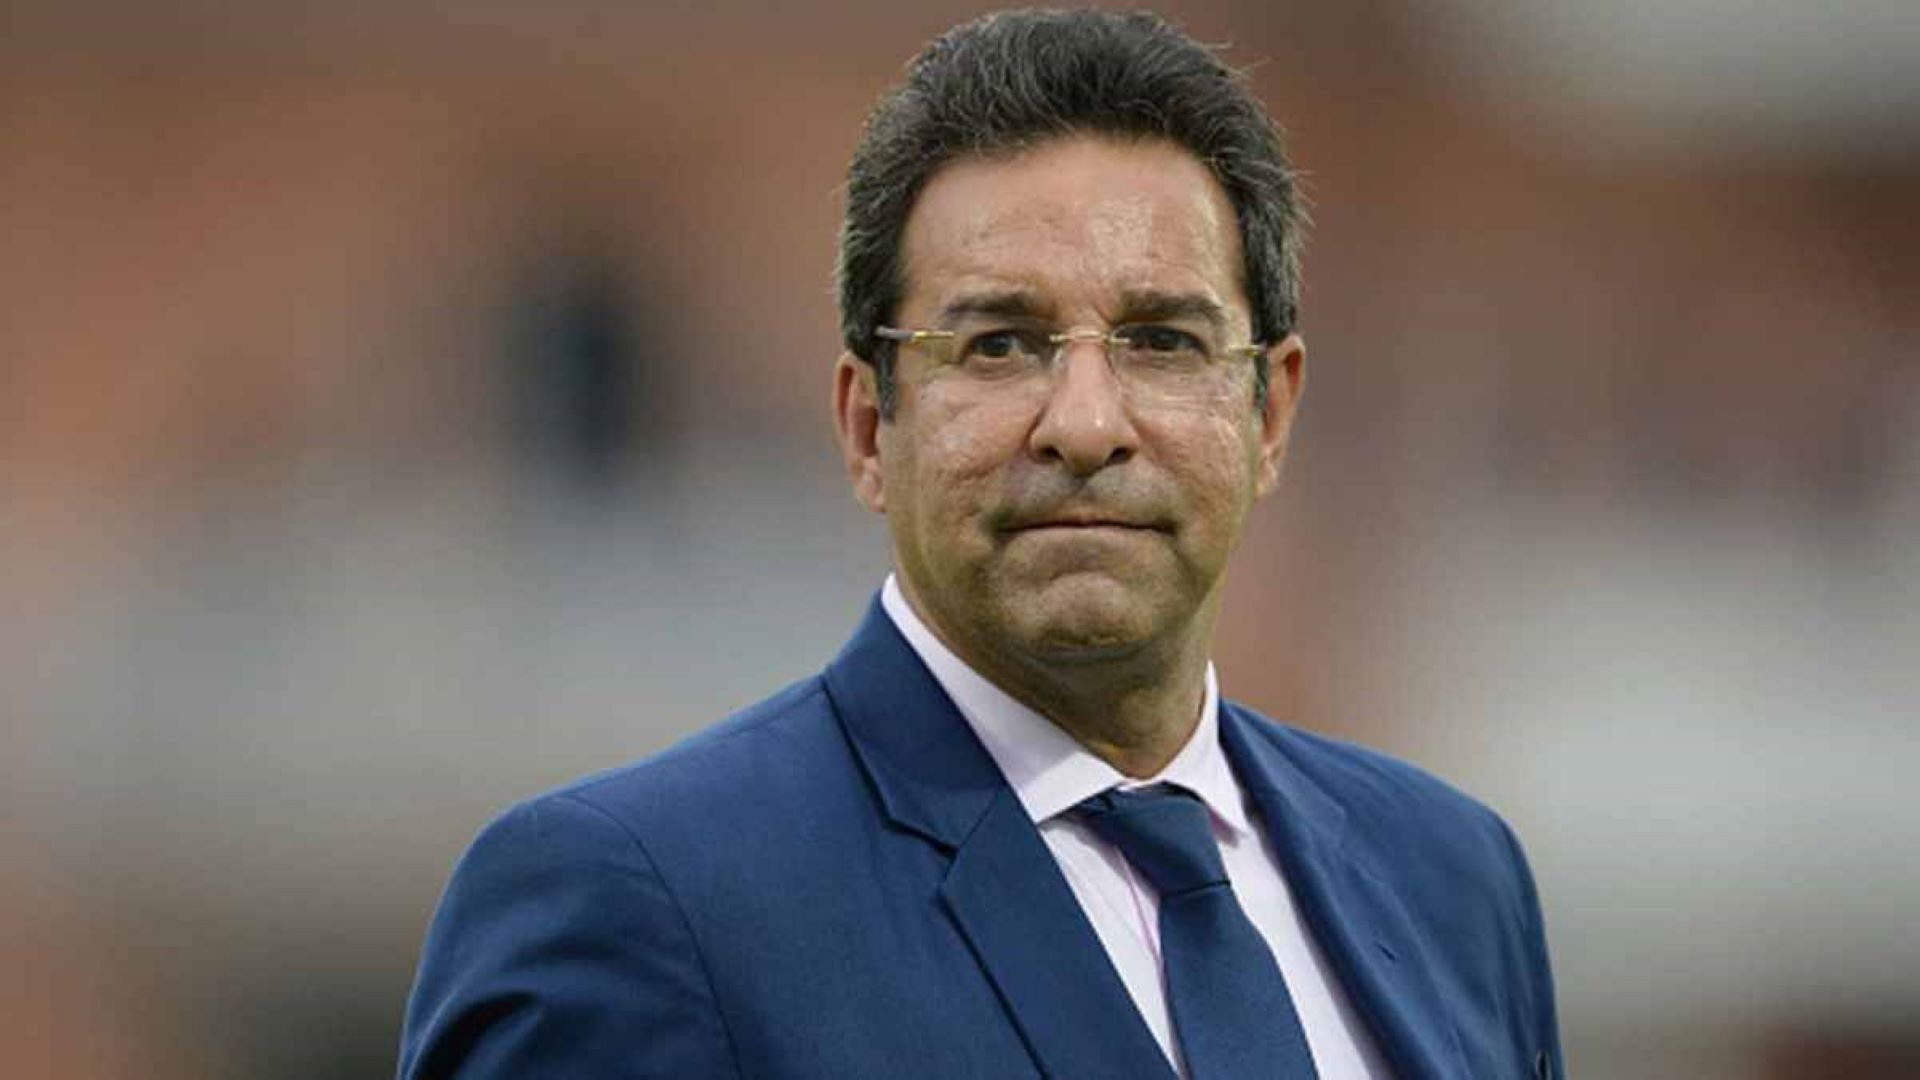 Wasim Akram was among the greatest bowlers to play the game